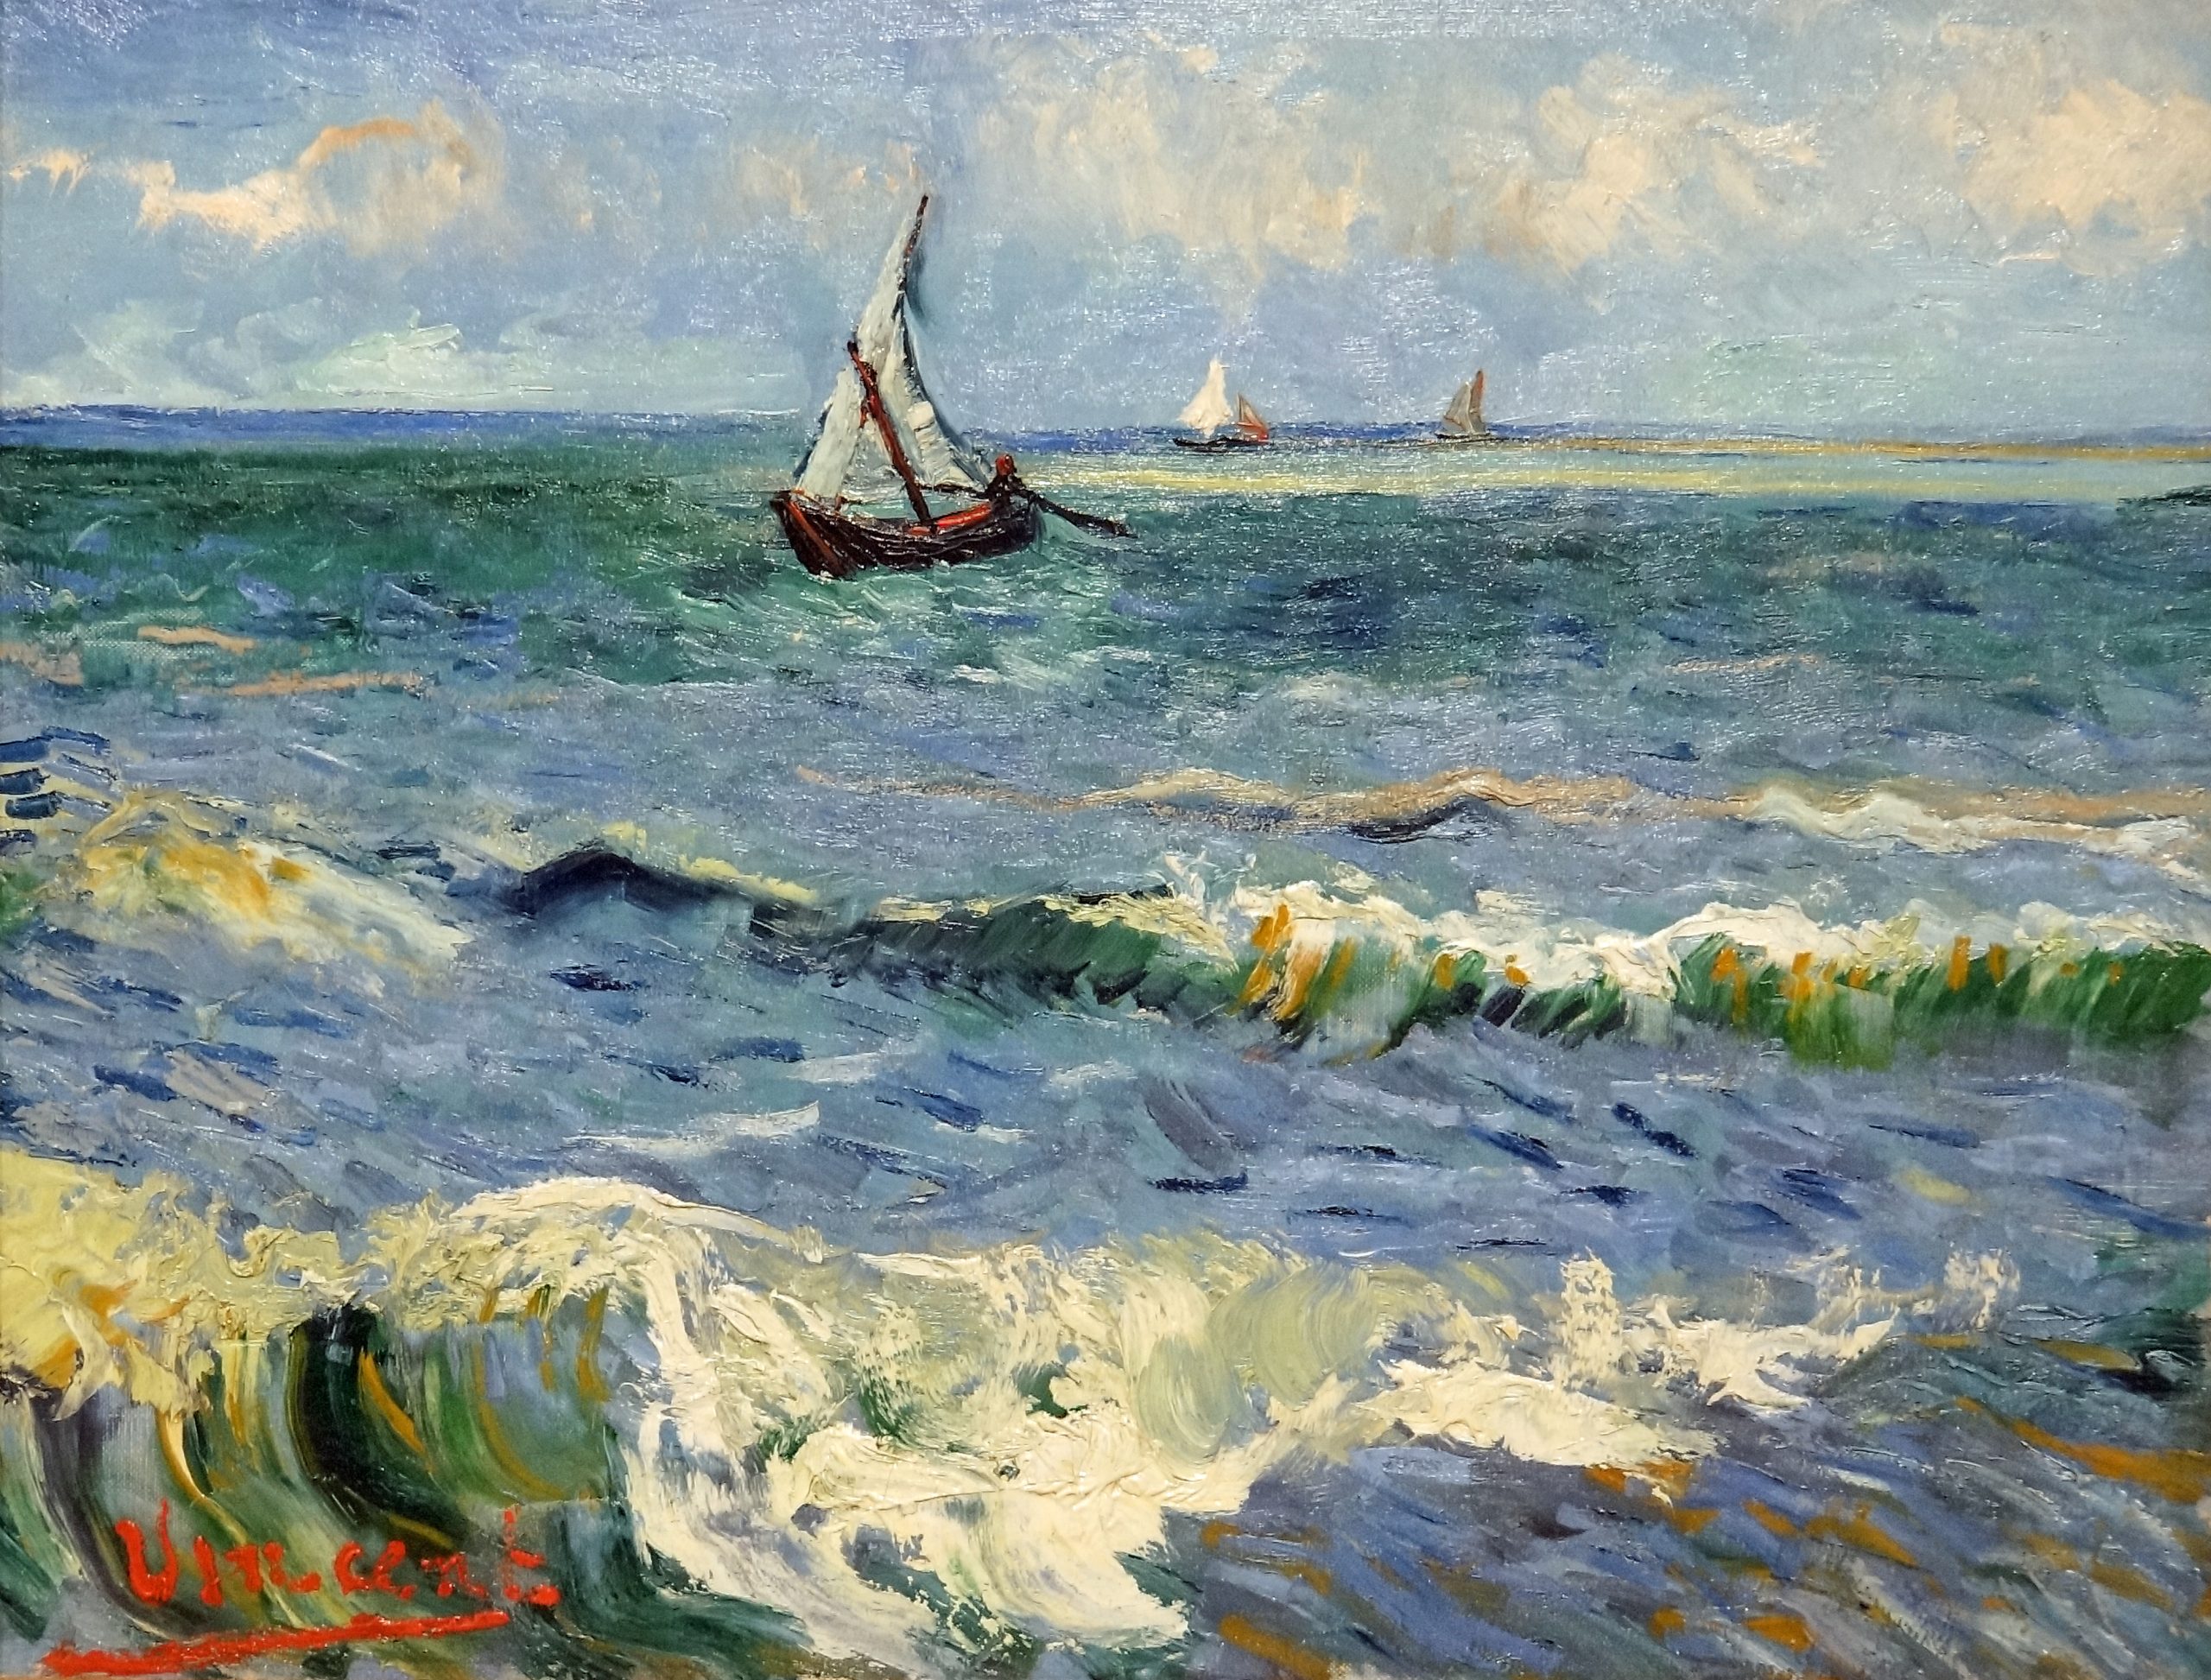 Sailboats in the ocean